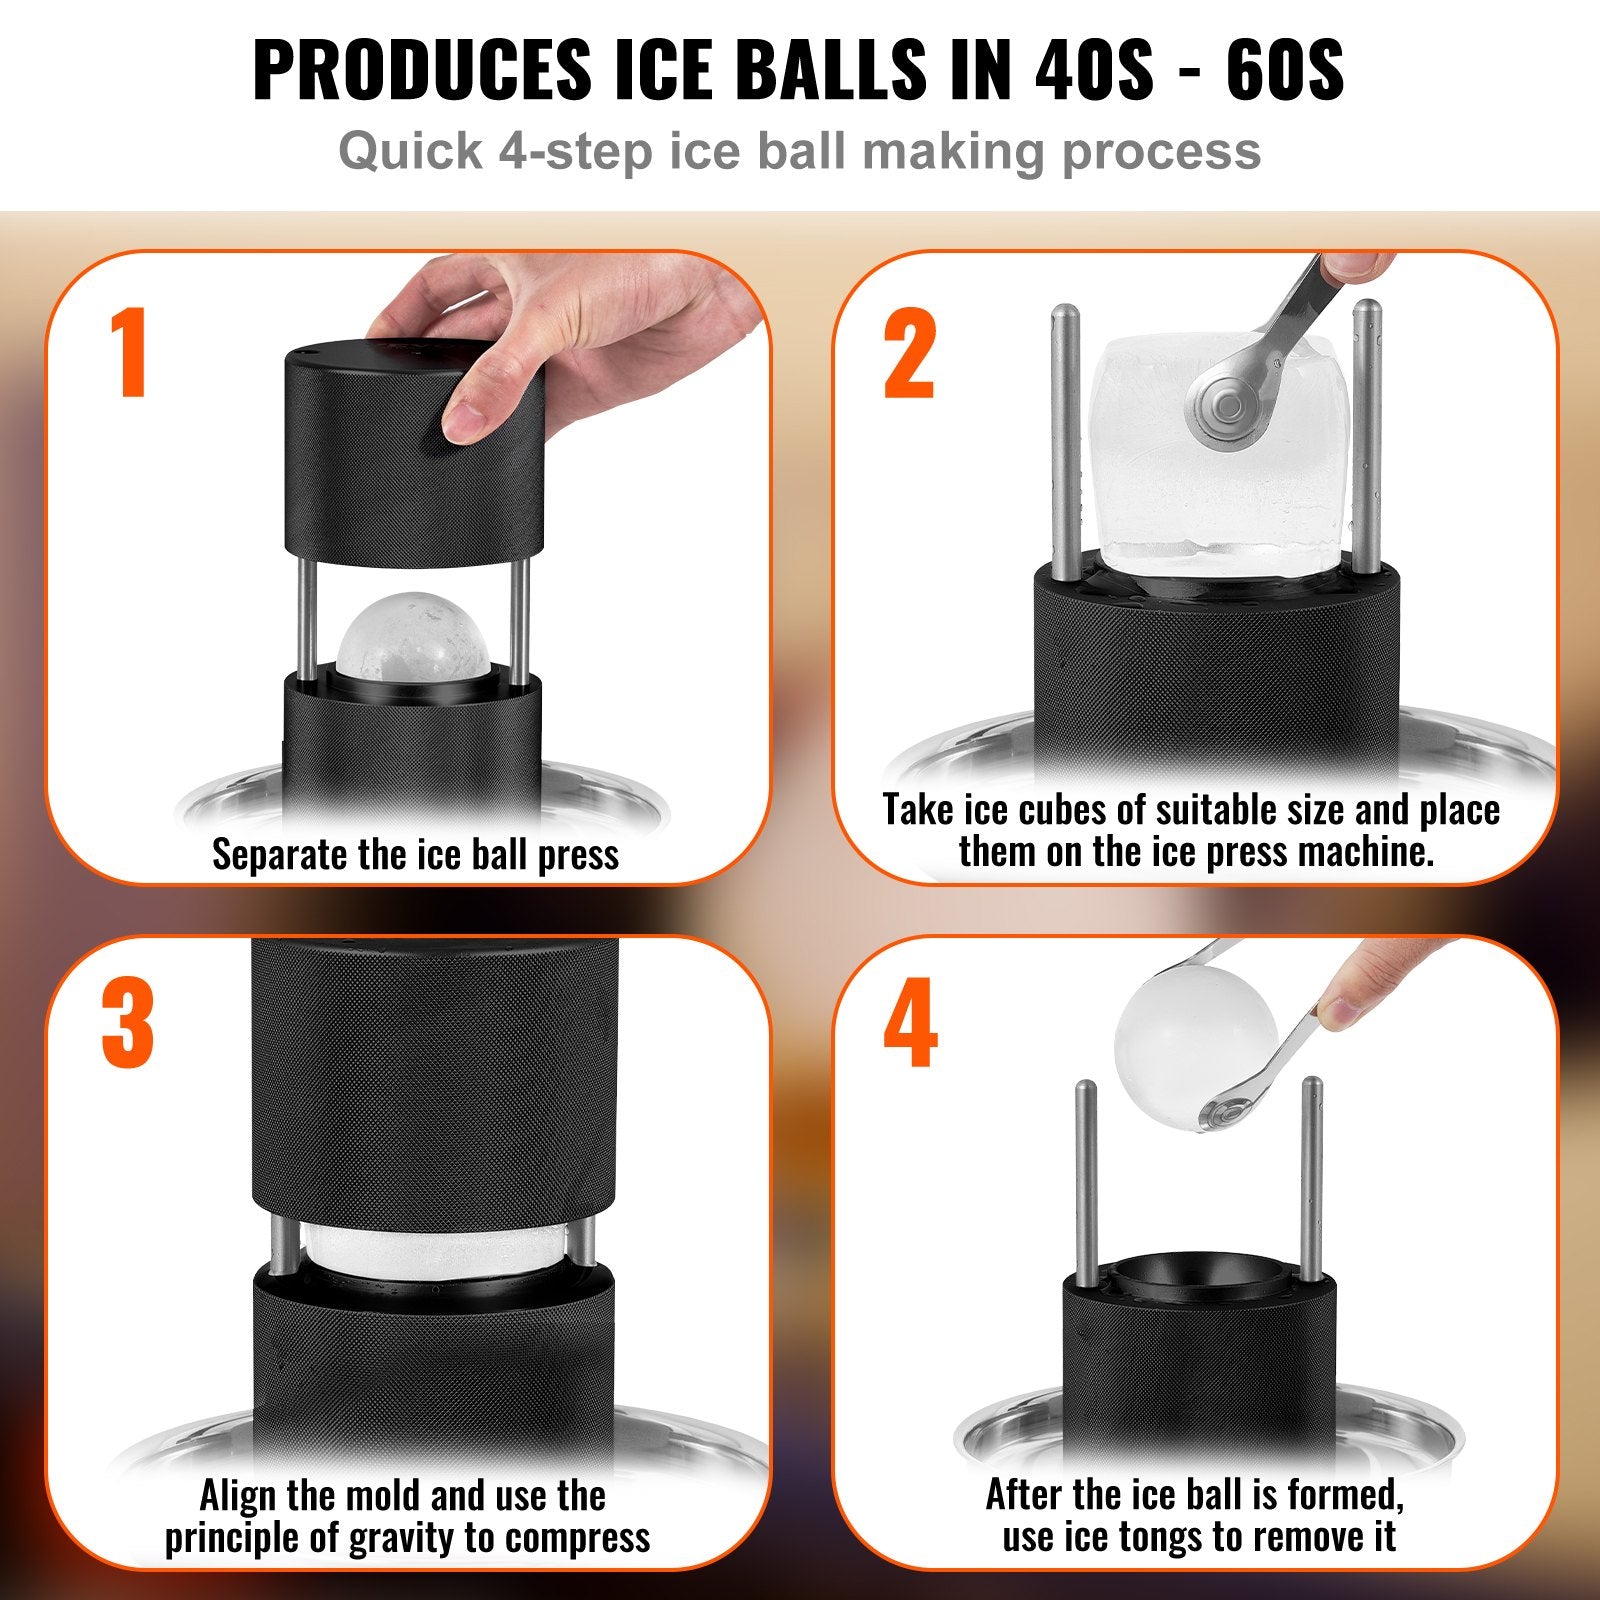 VEVOR Ice Ball Press, 2.4" Ice Ball Maker, Aircraft Al Alloy Ice Ball Press Kit for 60mm Ice Sphere, Ice Press with Tong and Drip Tray, for Whiskey, Cocktail, Bourbon, Scot on Party & Holiday, Black-1